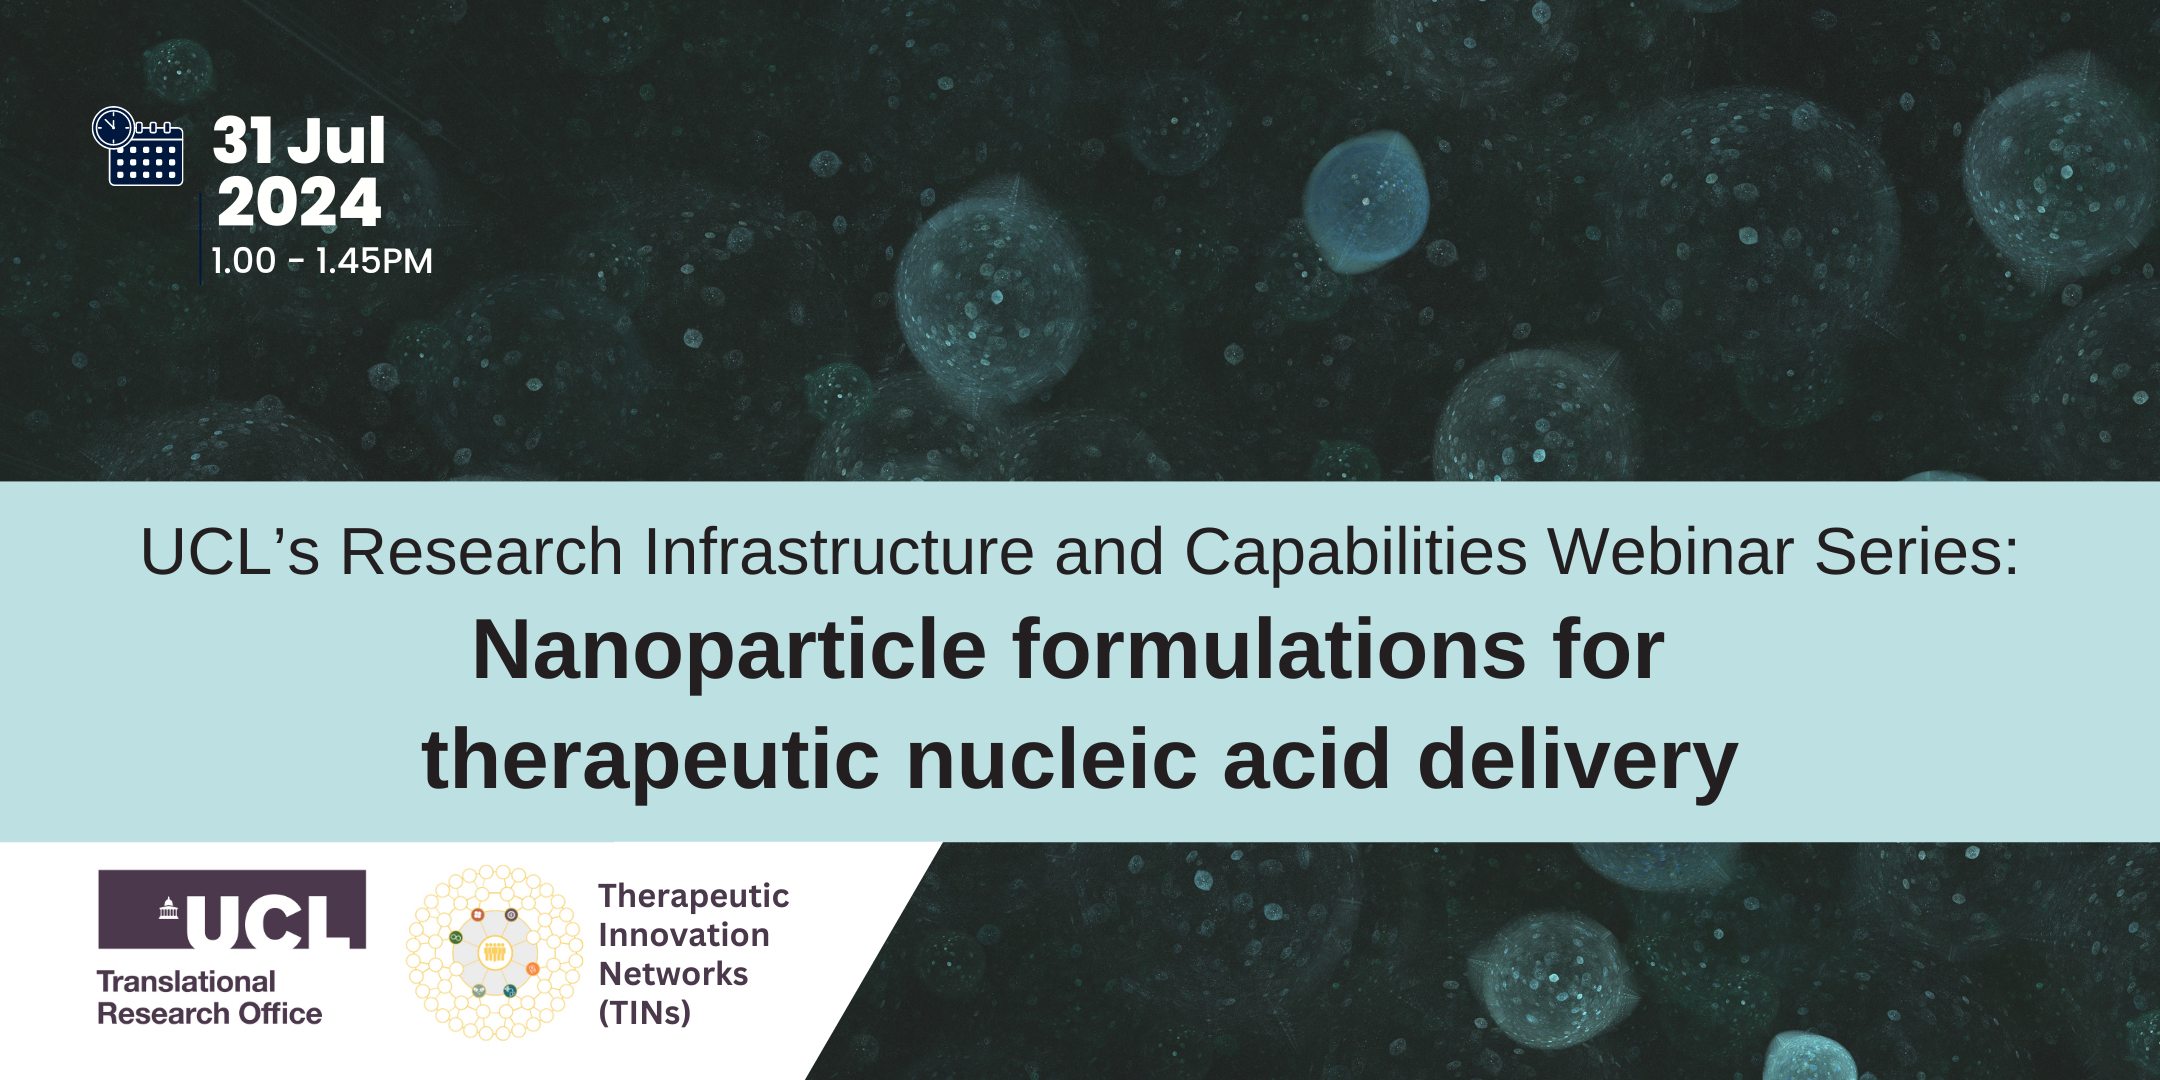 31 Jul 2024◾Webinar: Nanoparticle formulations for therapeutic nucleic acid delivery